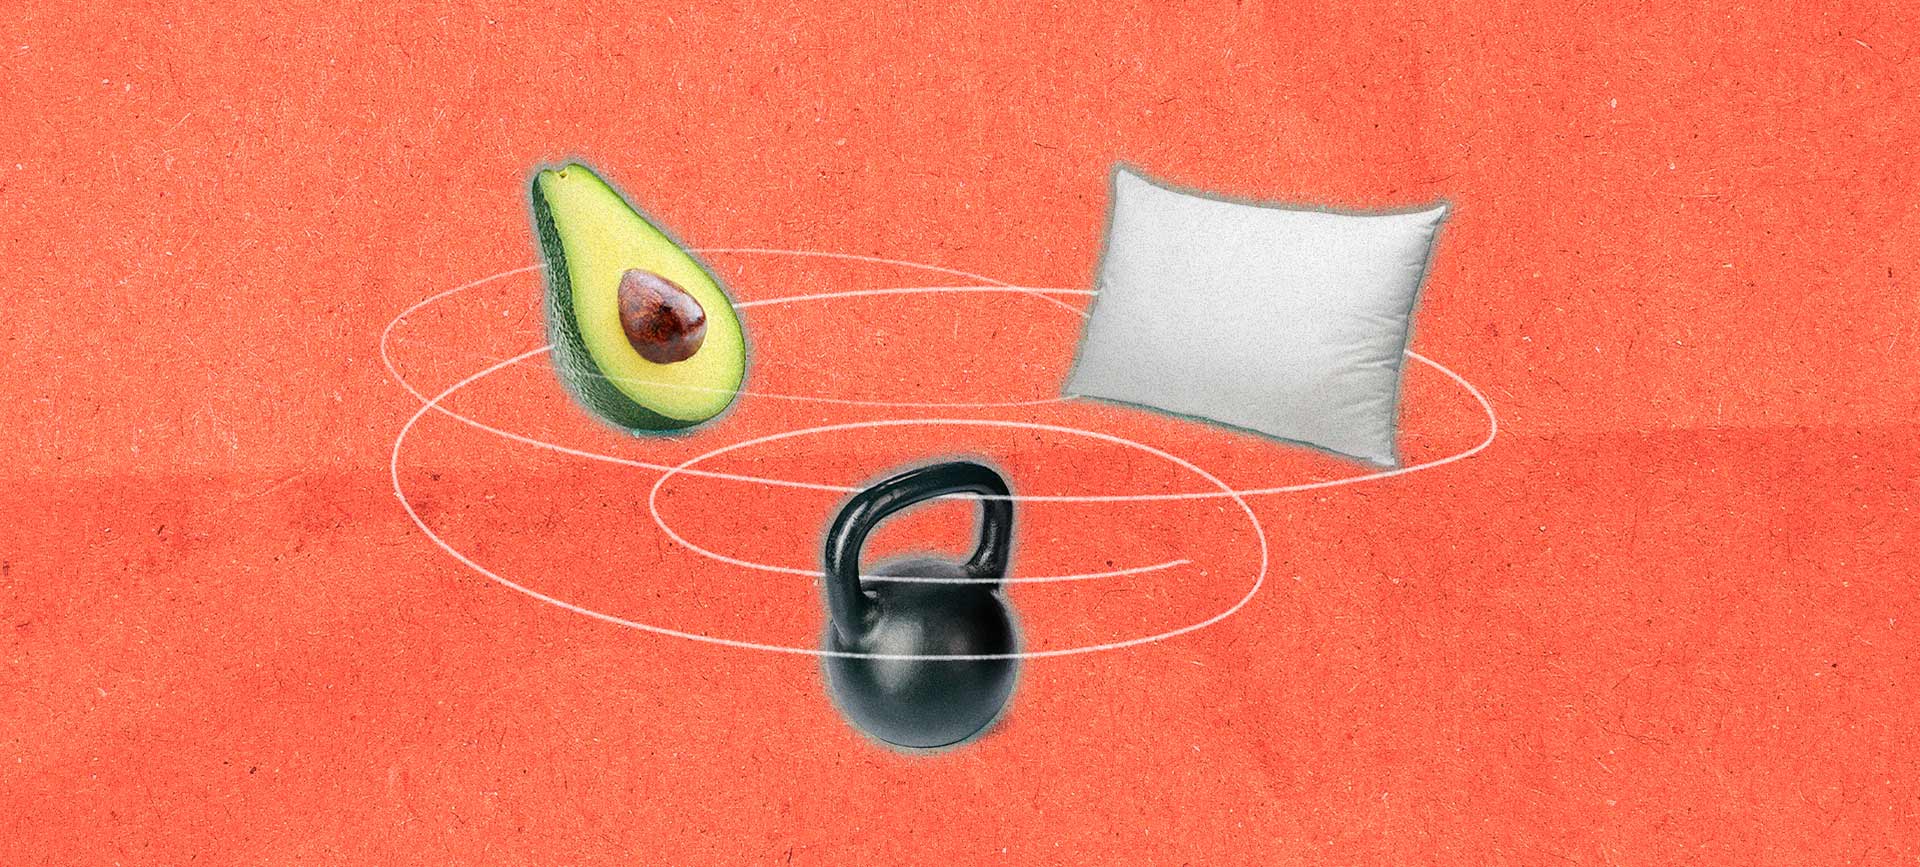 A pillow is connected to an open avocado half and a weight by white lines against an orange background.